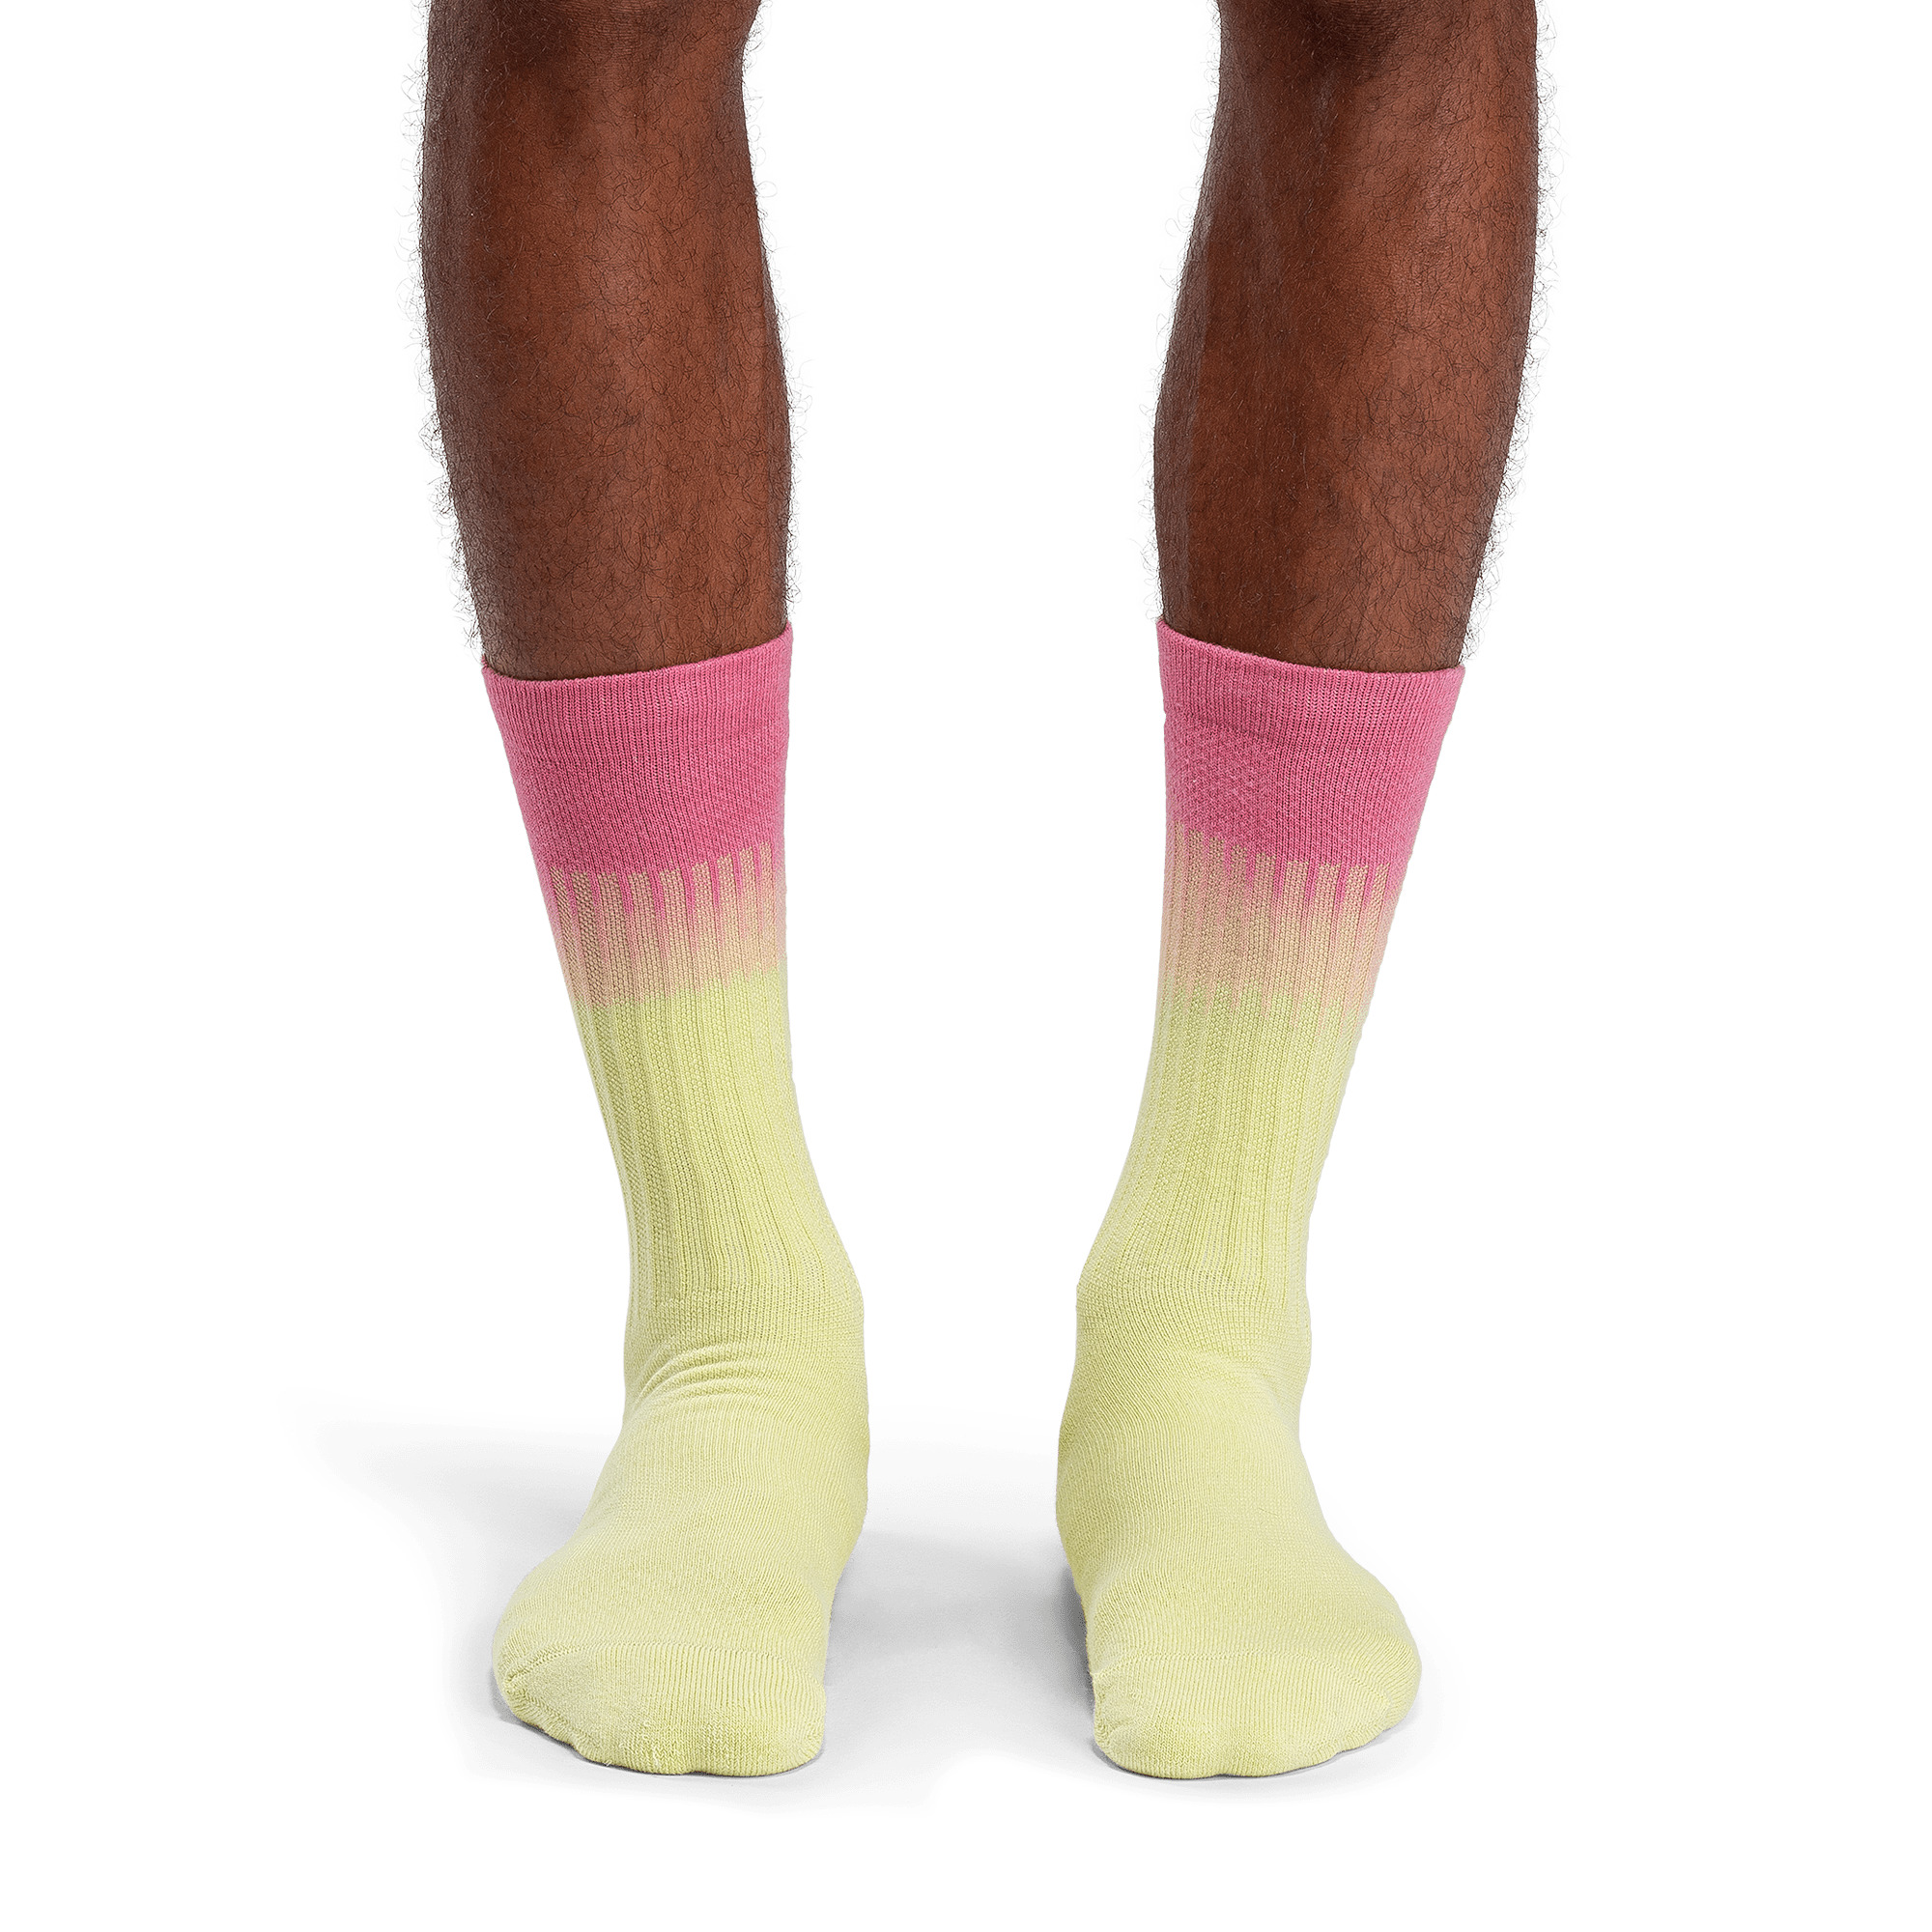 All-Day Sock - 2